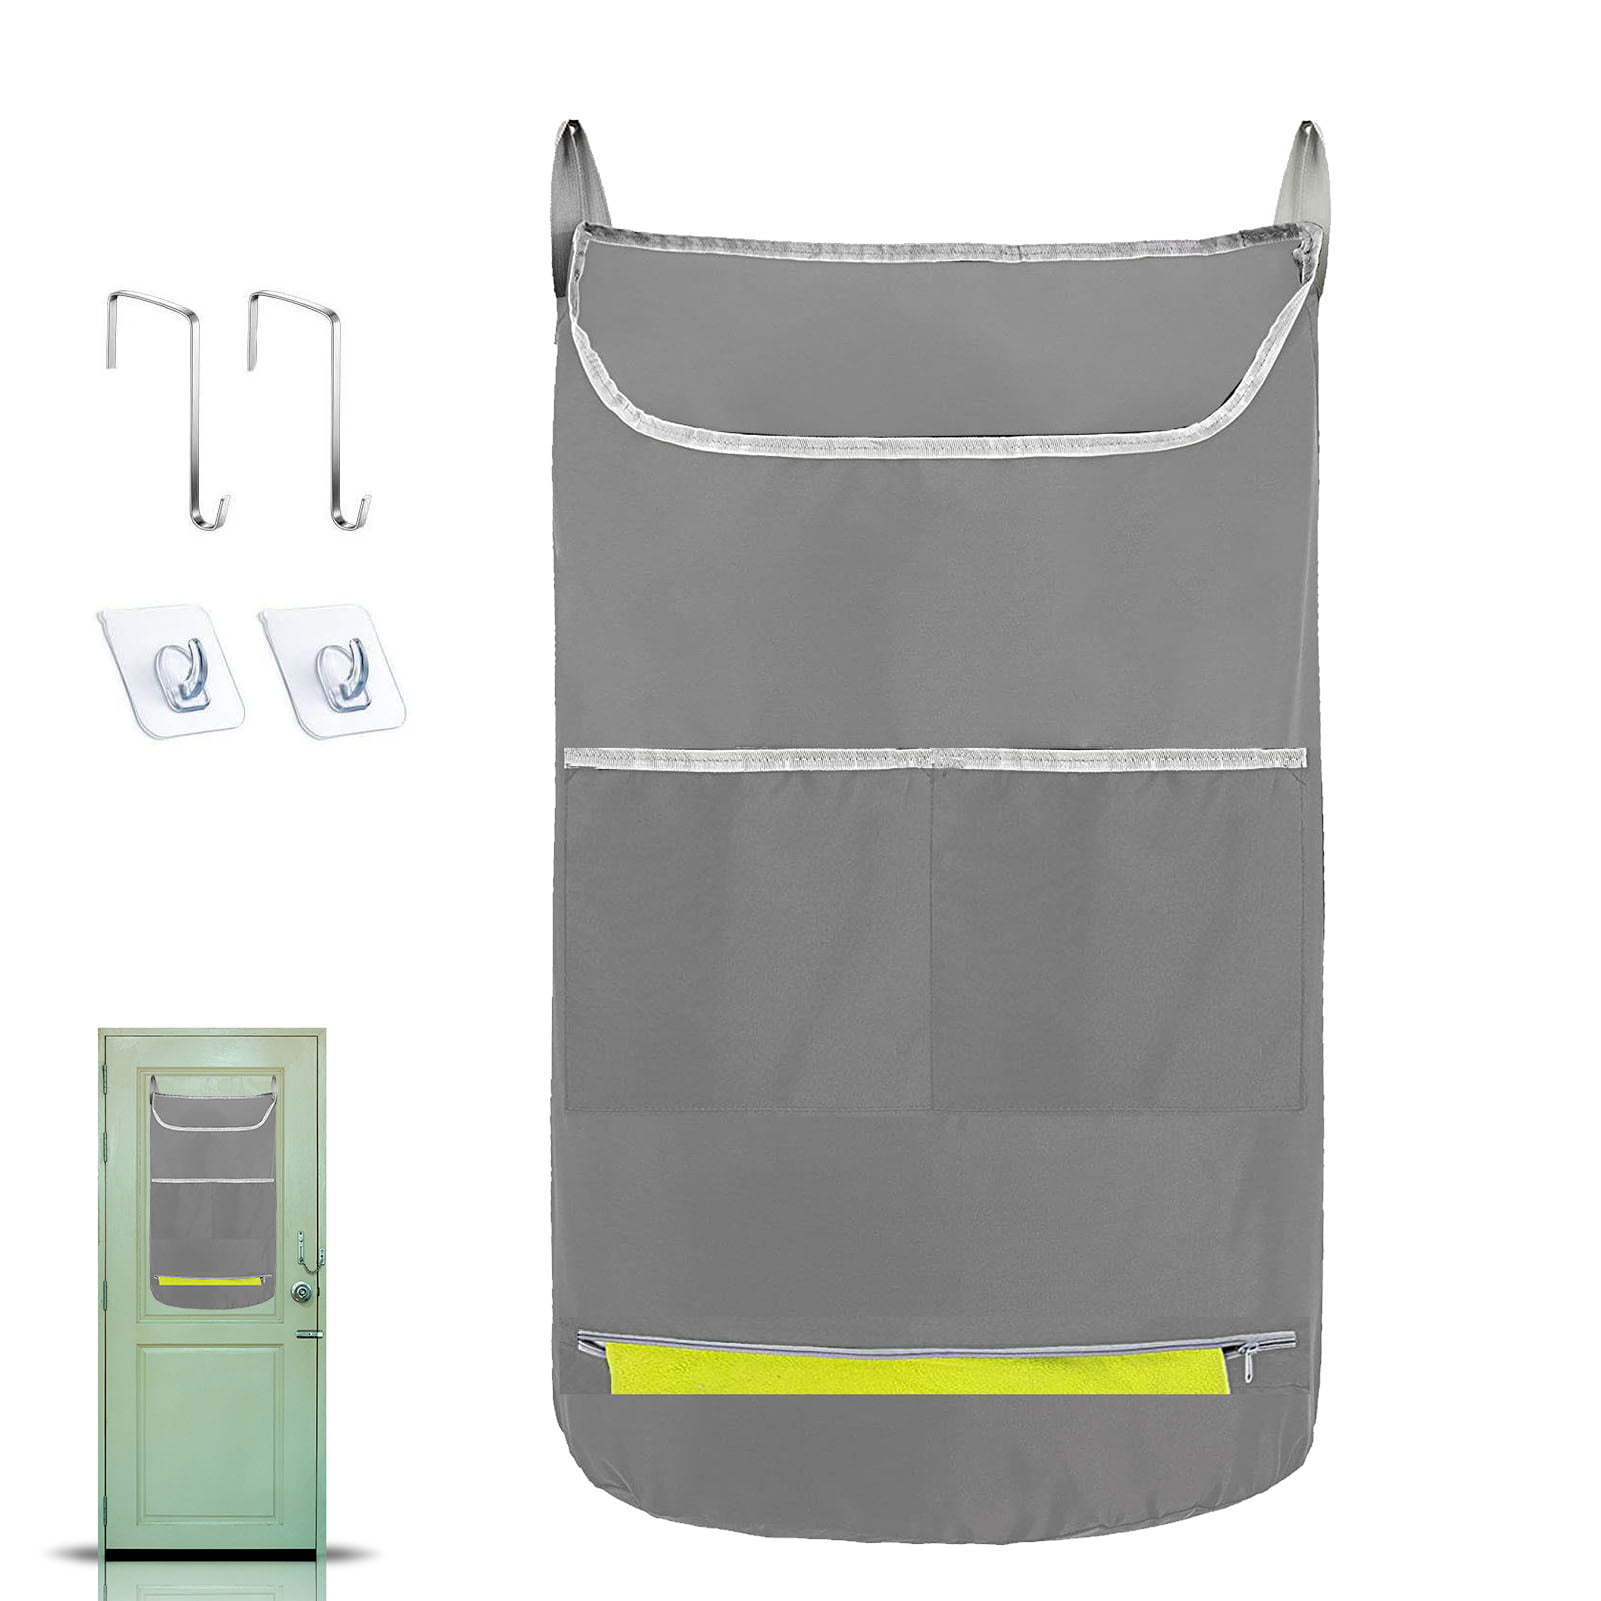 Details about   Storage Bag Household Large Capacity Dirty Clothes Pocket Hanging Laundry Bag 